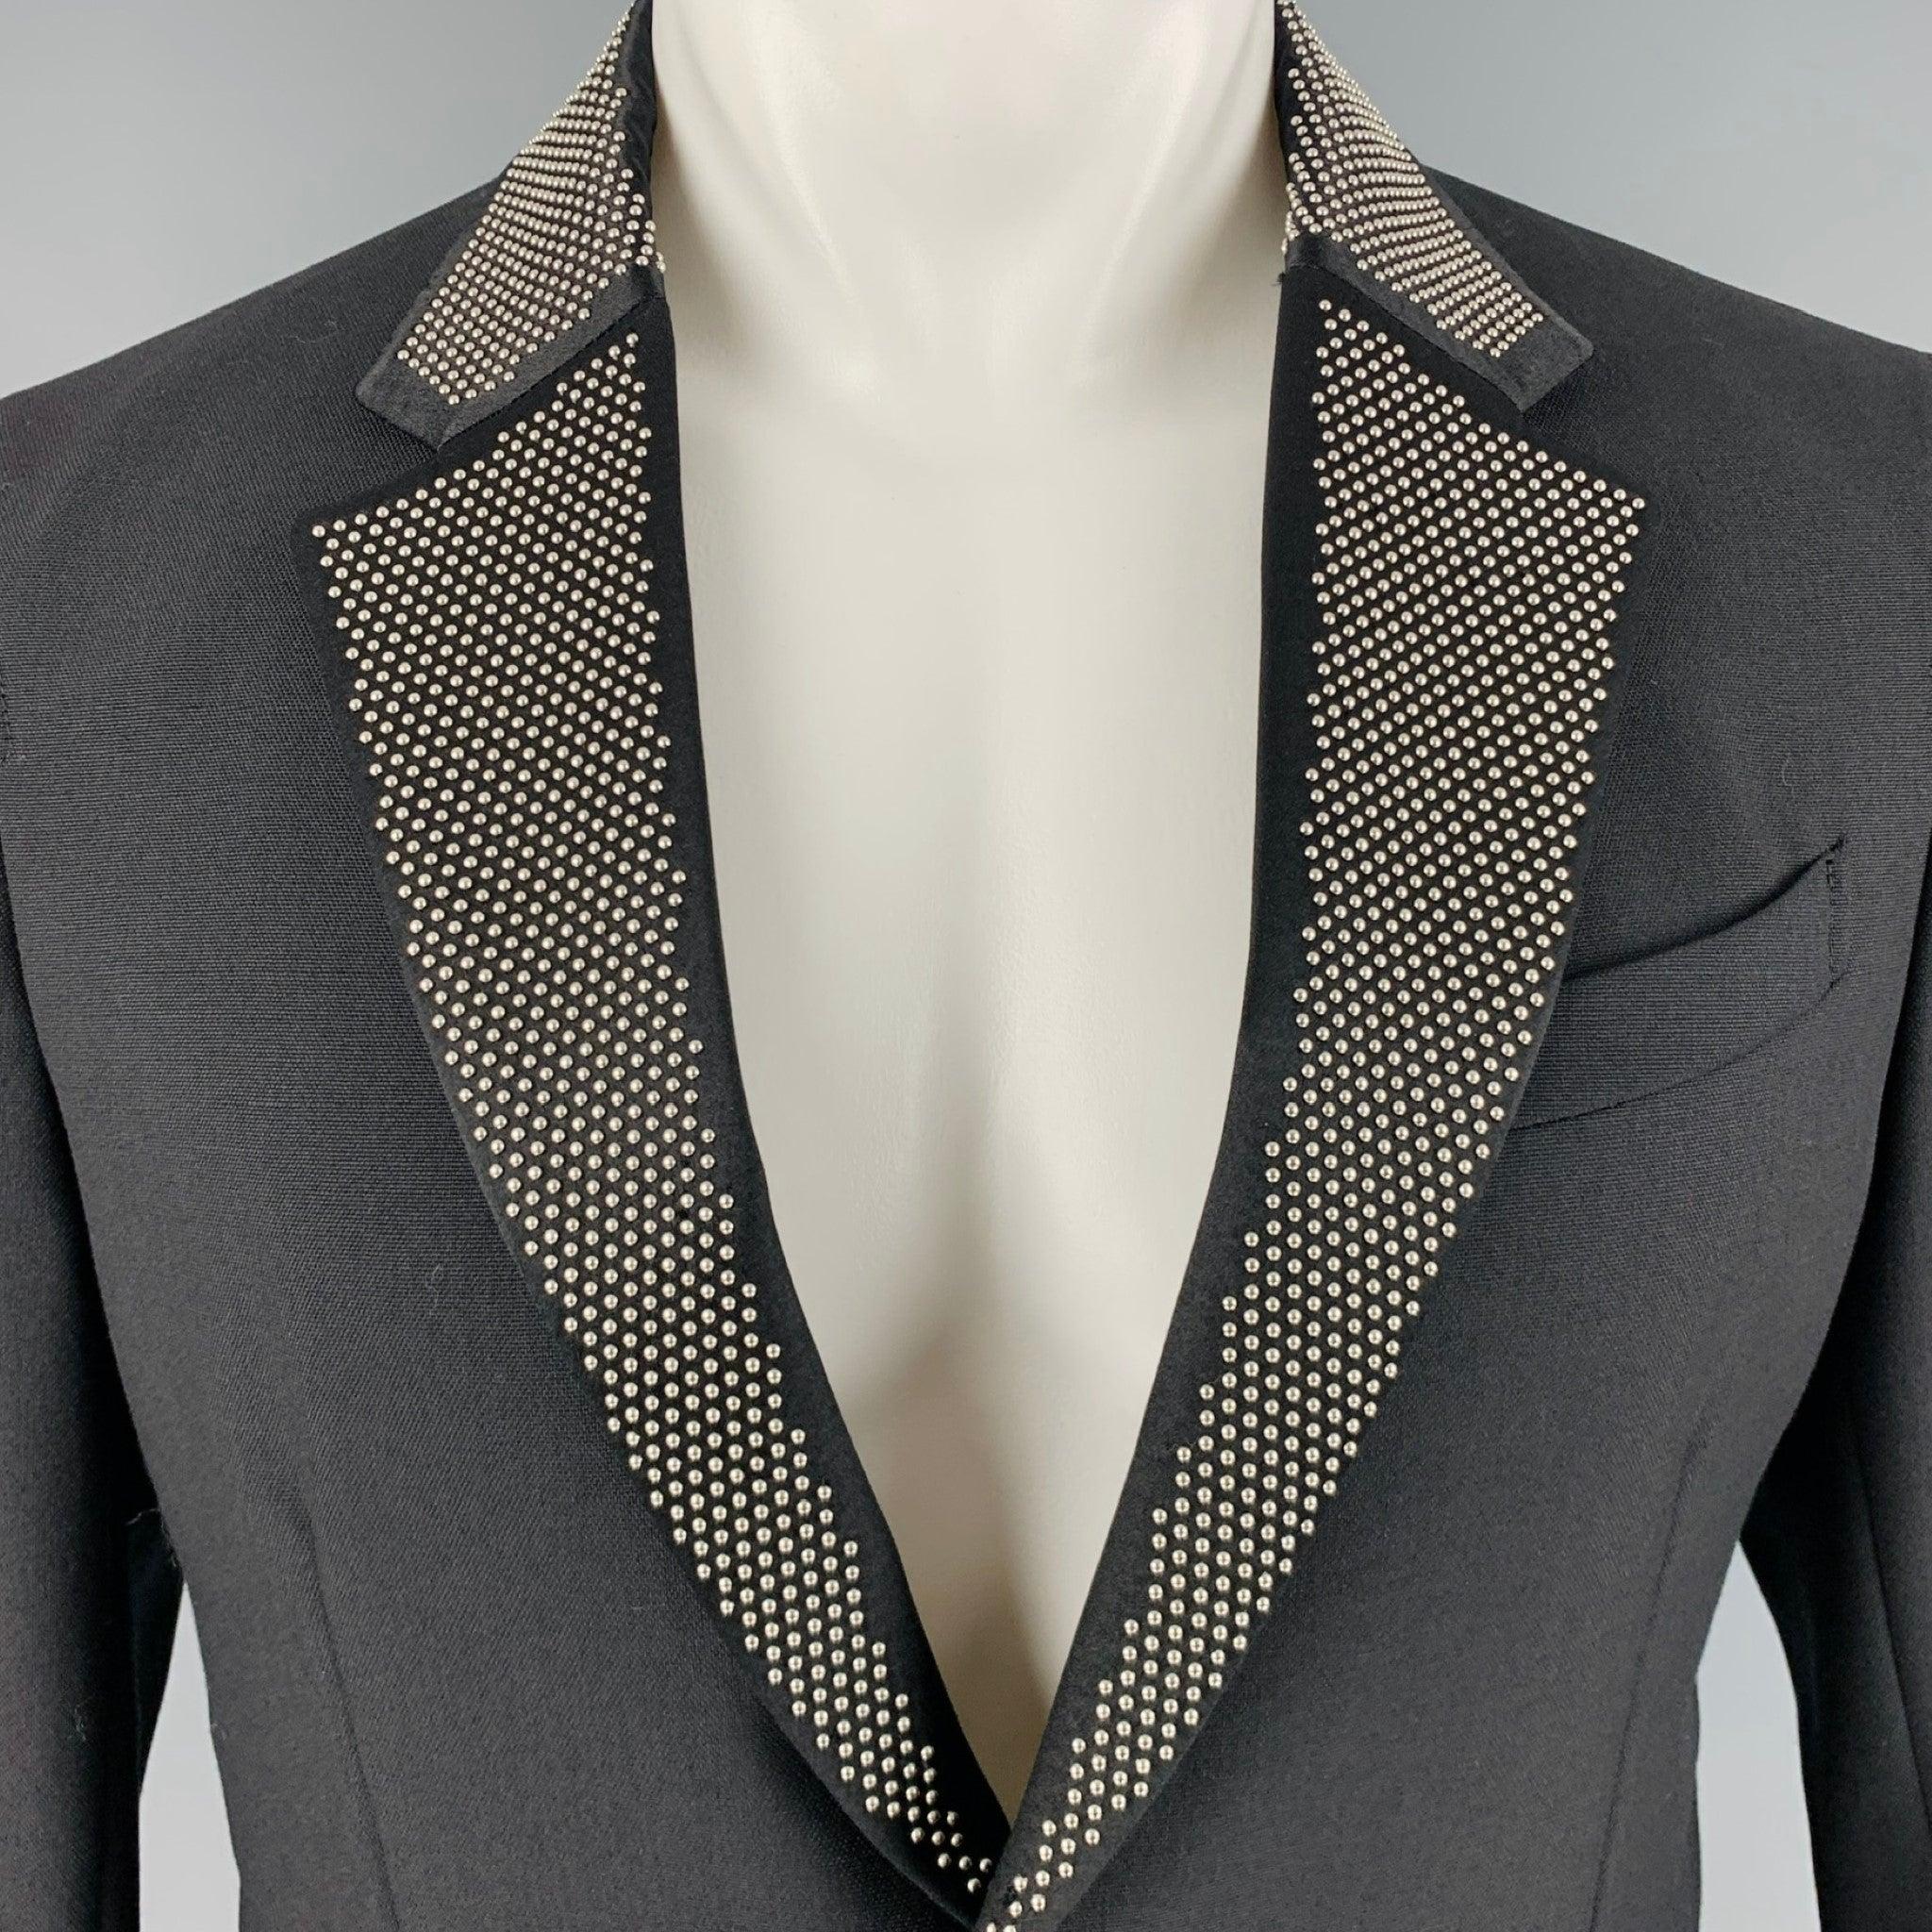 ALEXANDER MCQUEEN sport coat
in
a black wool mohair blend fabric featuring a studded notch lapel, single vented back, and double button closure. Made in Italy.Excellent Pre-Owned Condition. 

Marked:   48 

Measurements: 
 
Shoulder: 16.5 inches